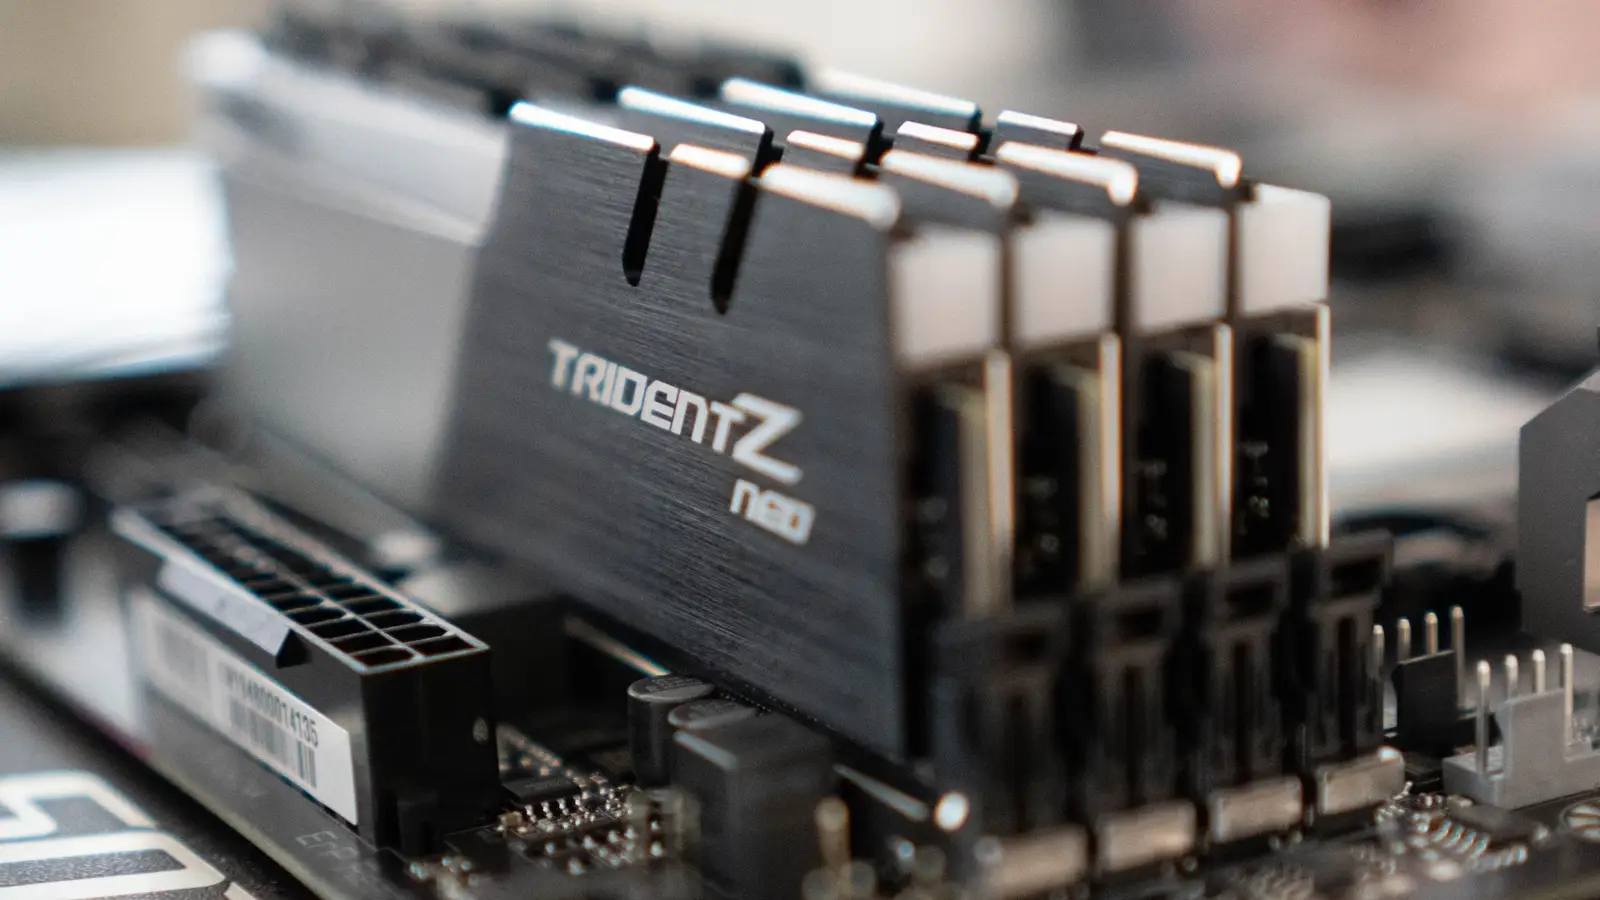 trident z computer ram sticks placed in motherboard